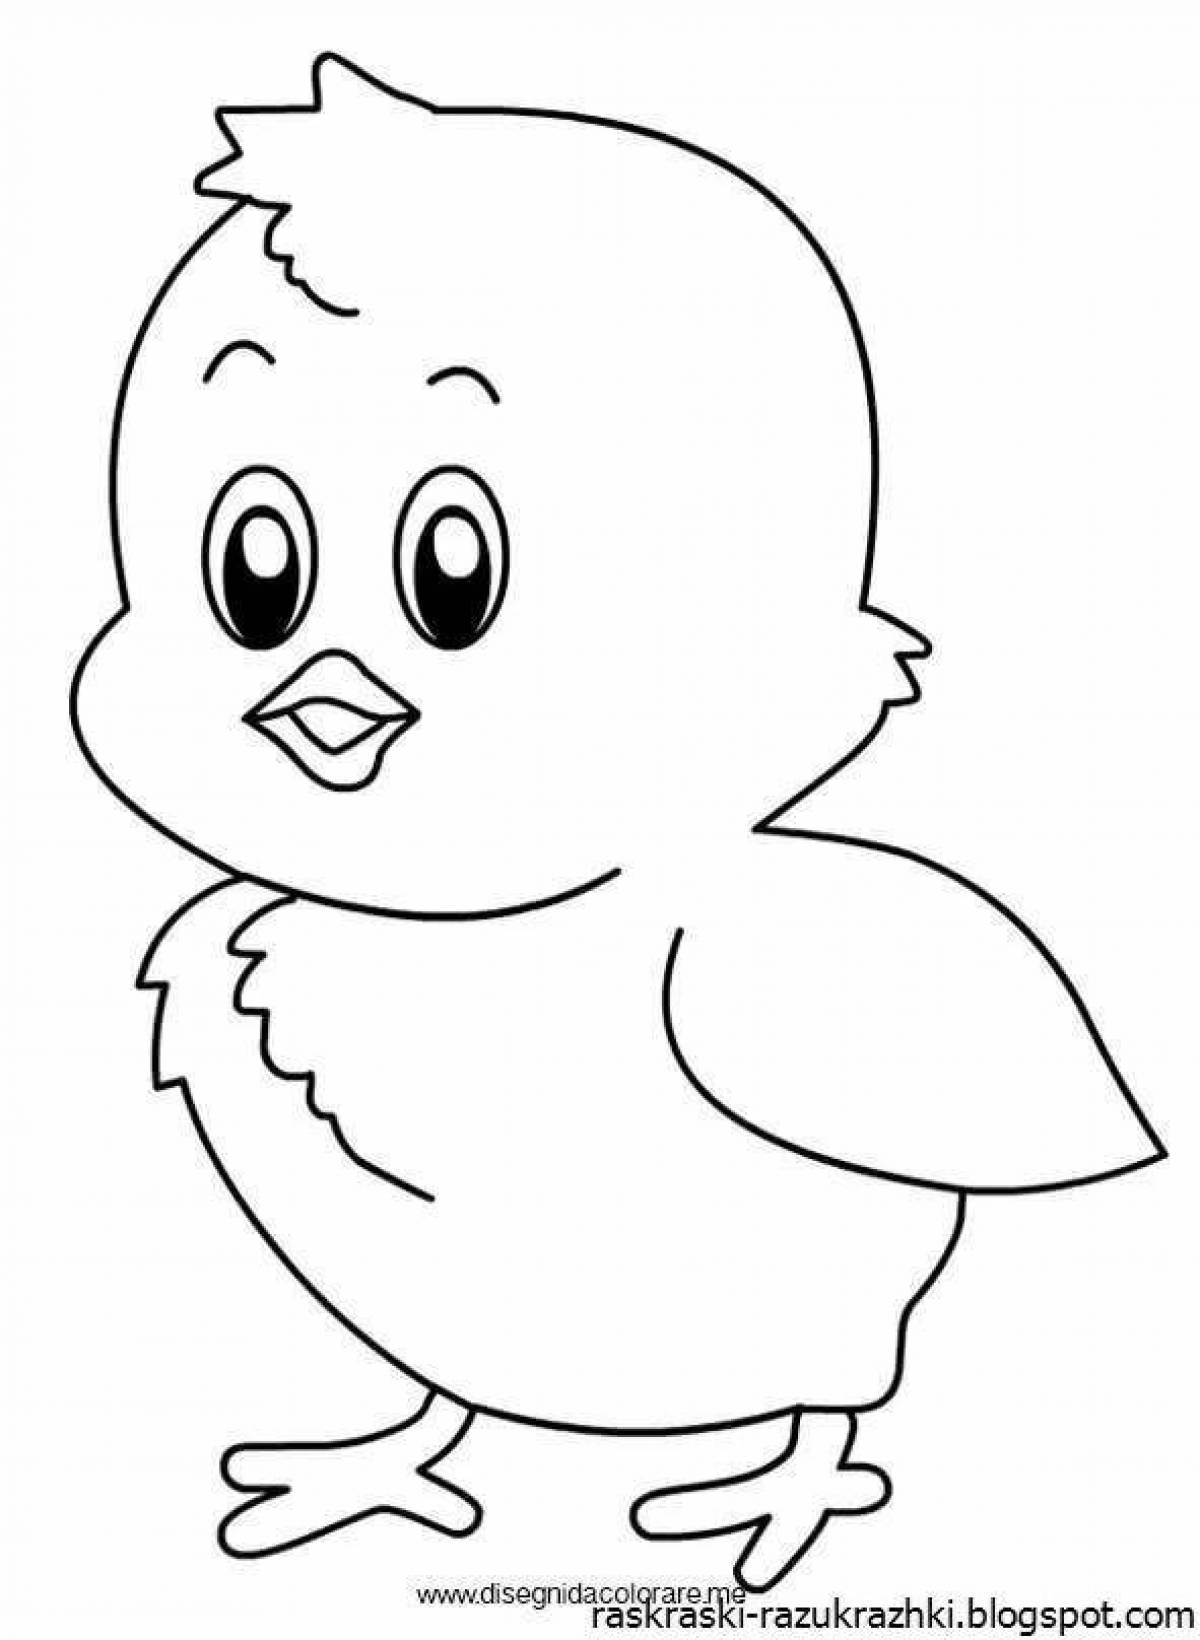 Animated chick coloring page for 3-4 year olds